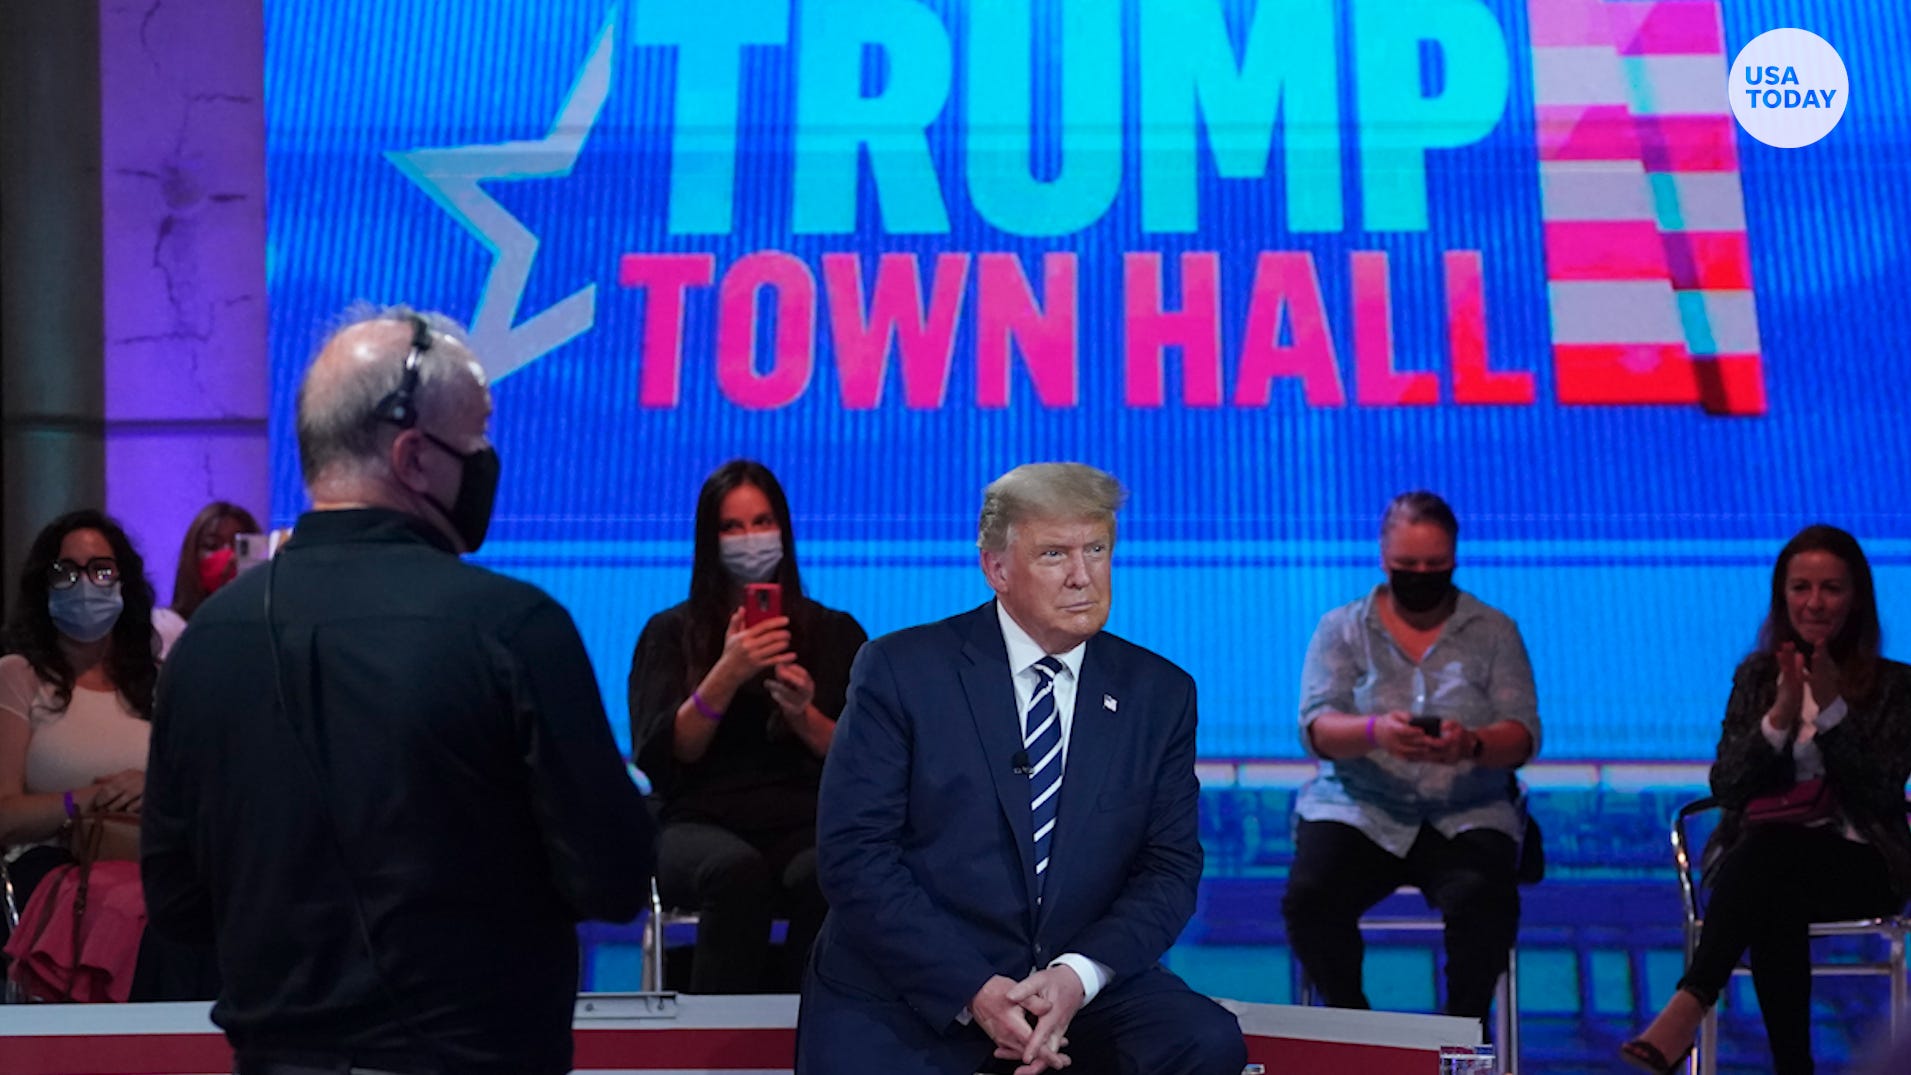 President Trump's viralworthy moments during his town hall on NBC